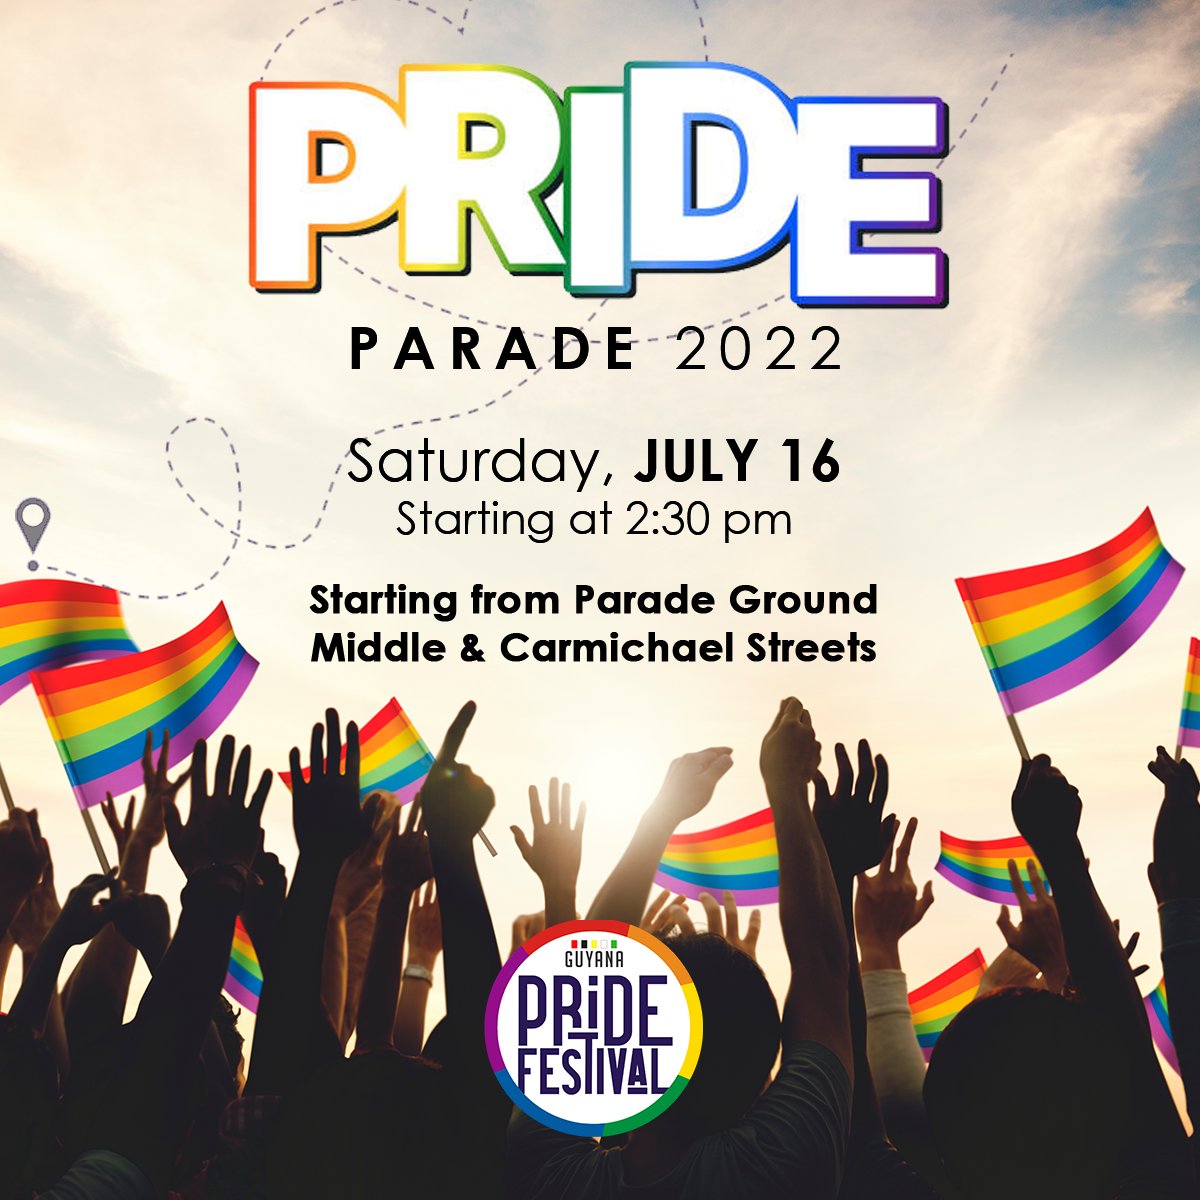 Rain or shine, #PrideParade2022 must go on! Assemble at Parade Ground this Saturday, July 16, to move off at 2:30 pm and end at the Square of the Revolution! Wear costumes, bring flags, banners, placards and display your rainbow colours under the theme #OurBodiesOurLivesOurRights